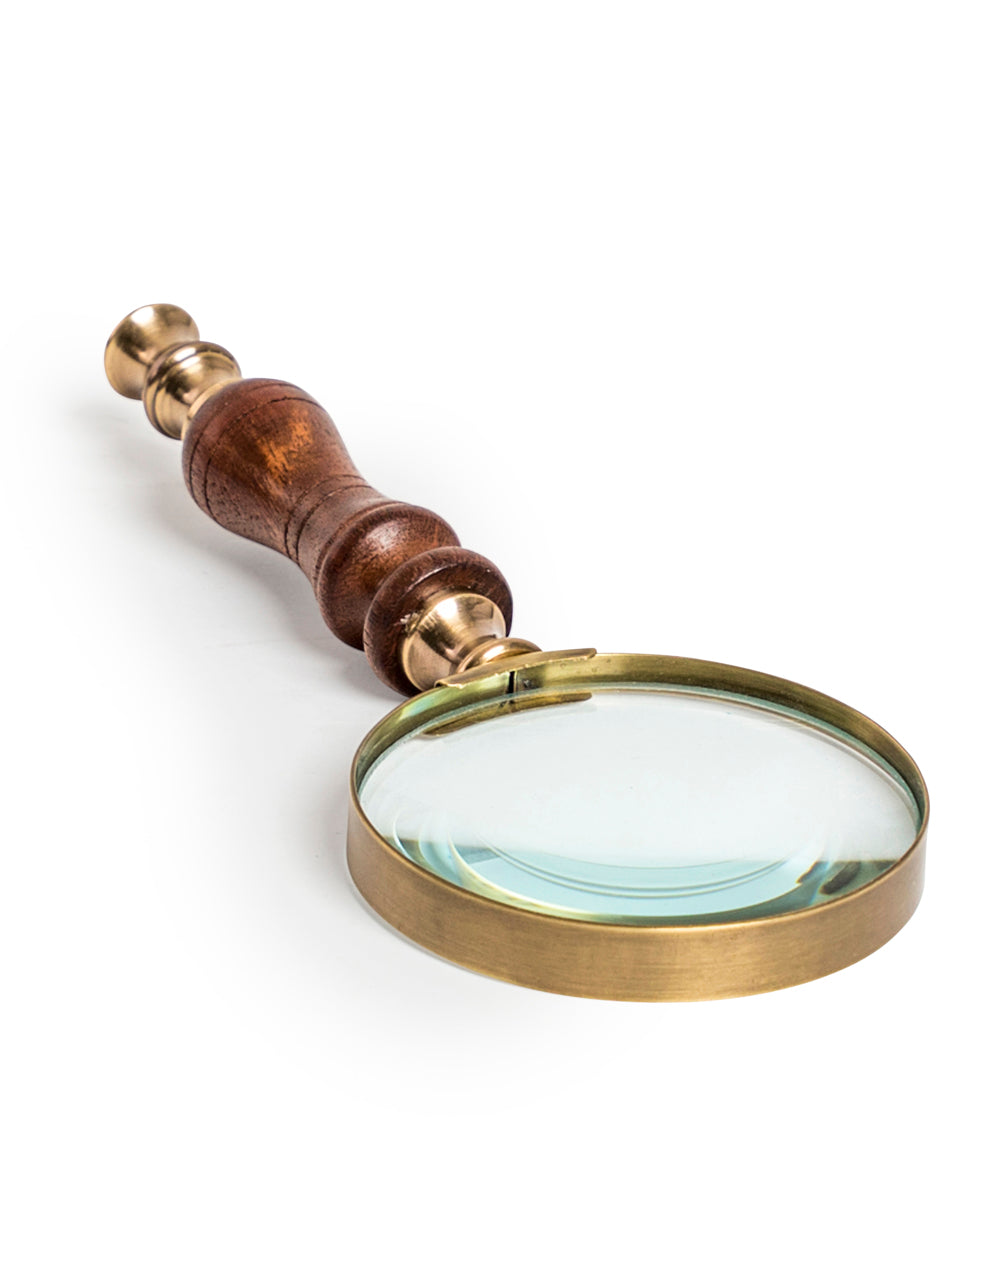 Antiqued Traditonal Magnifying Glass with Wooden Handle